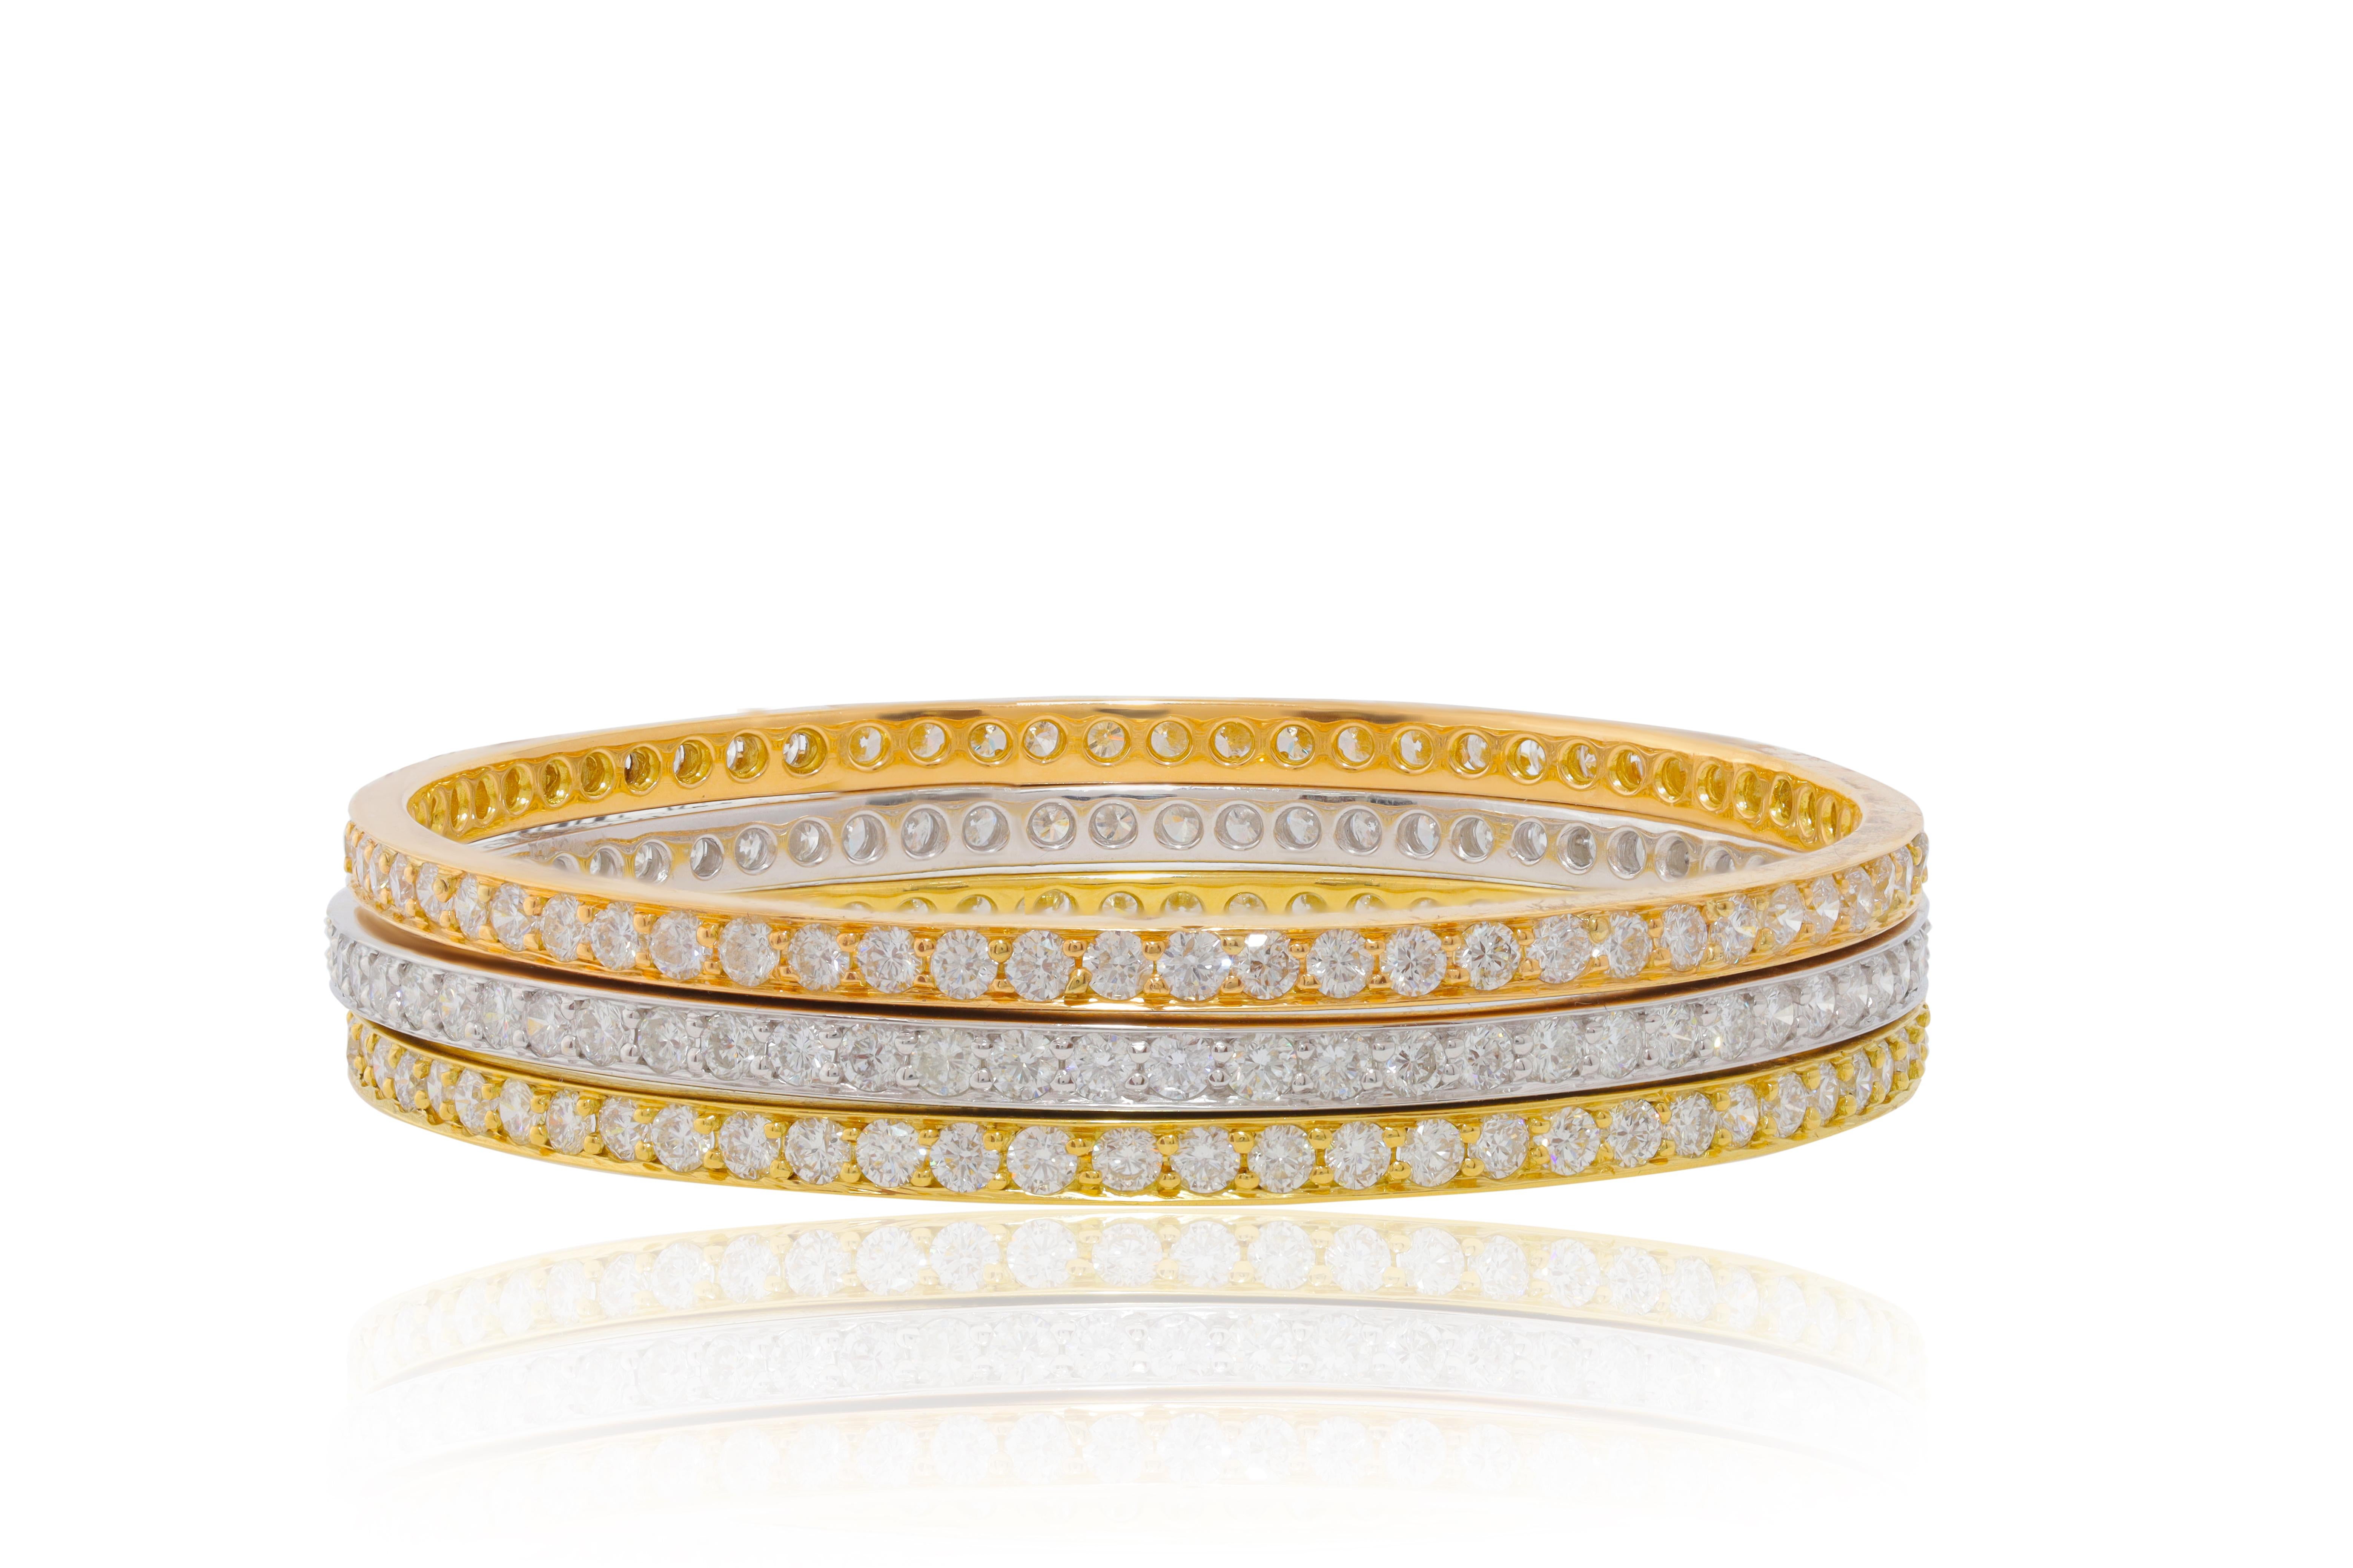 Tri-color set of white, yellow, and rose gold bangles adorned with 23 cts tw of channel set diamonds
Diana M. is a leading supplier of top-quality fine jewelry for over 35 years.
Diana M is one-stop shop for all your jewelry shopping, carrying line